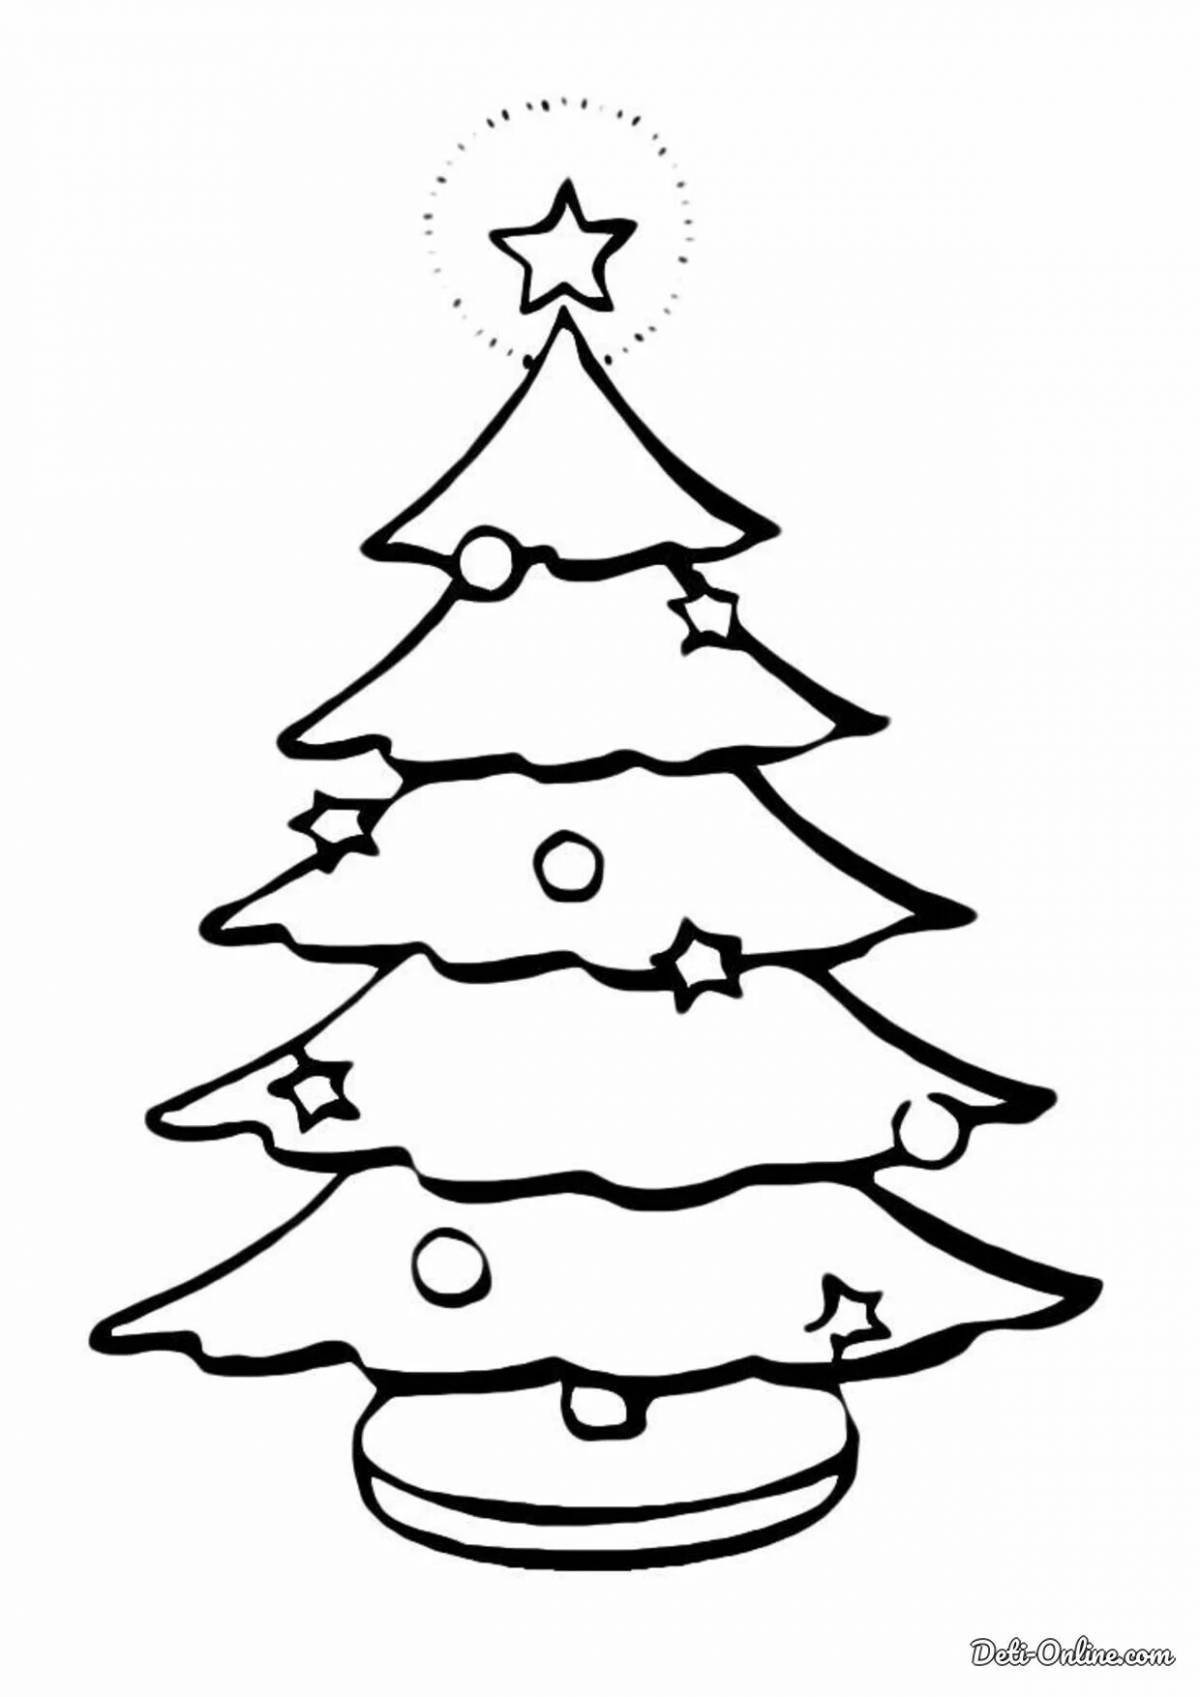 Charming tree coloring page